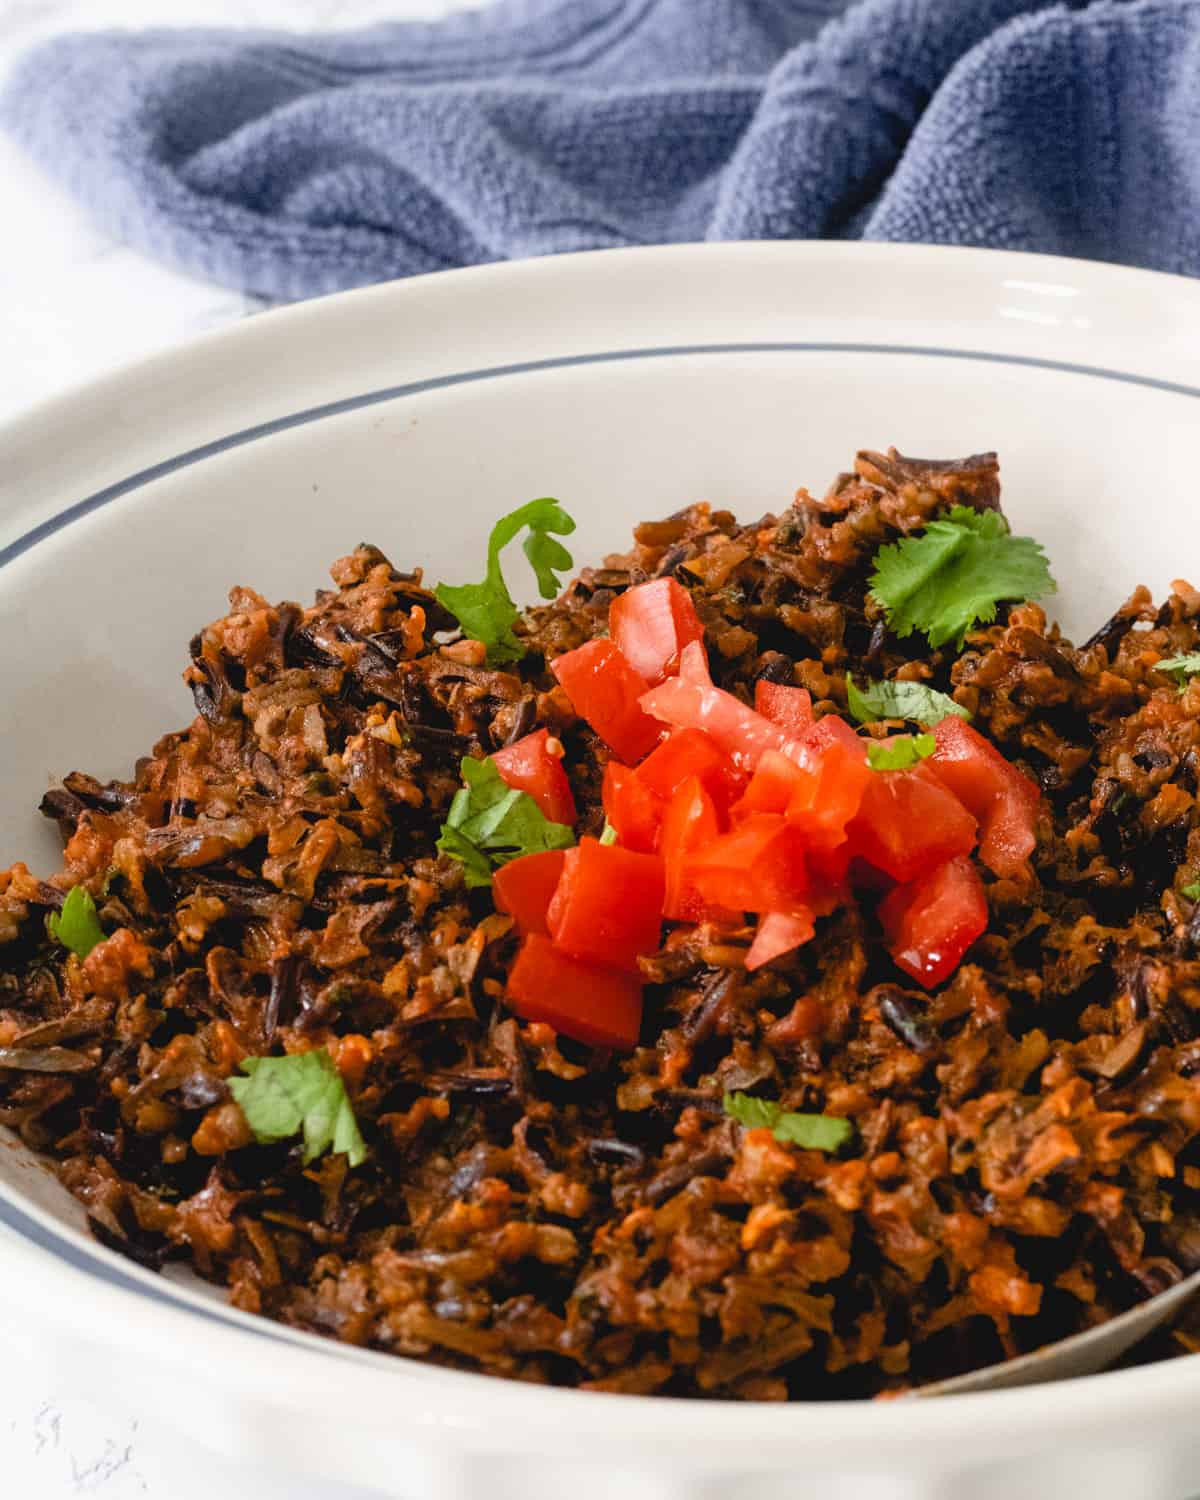 Bowl of Mexican wild rice, topped with chopped tomatoes and cilantro.